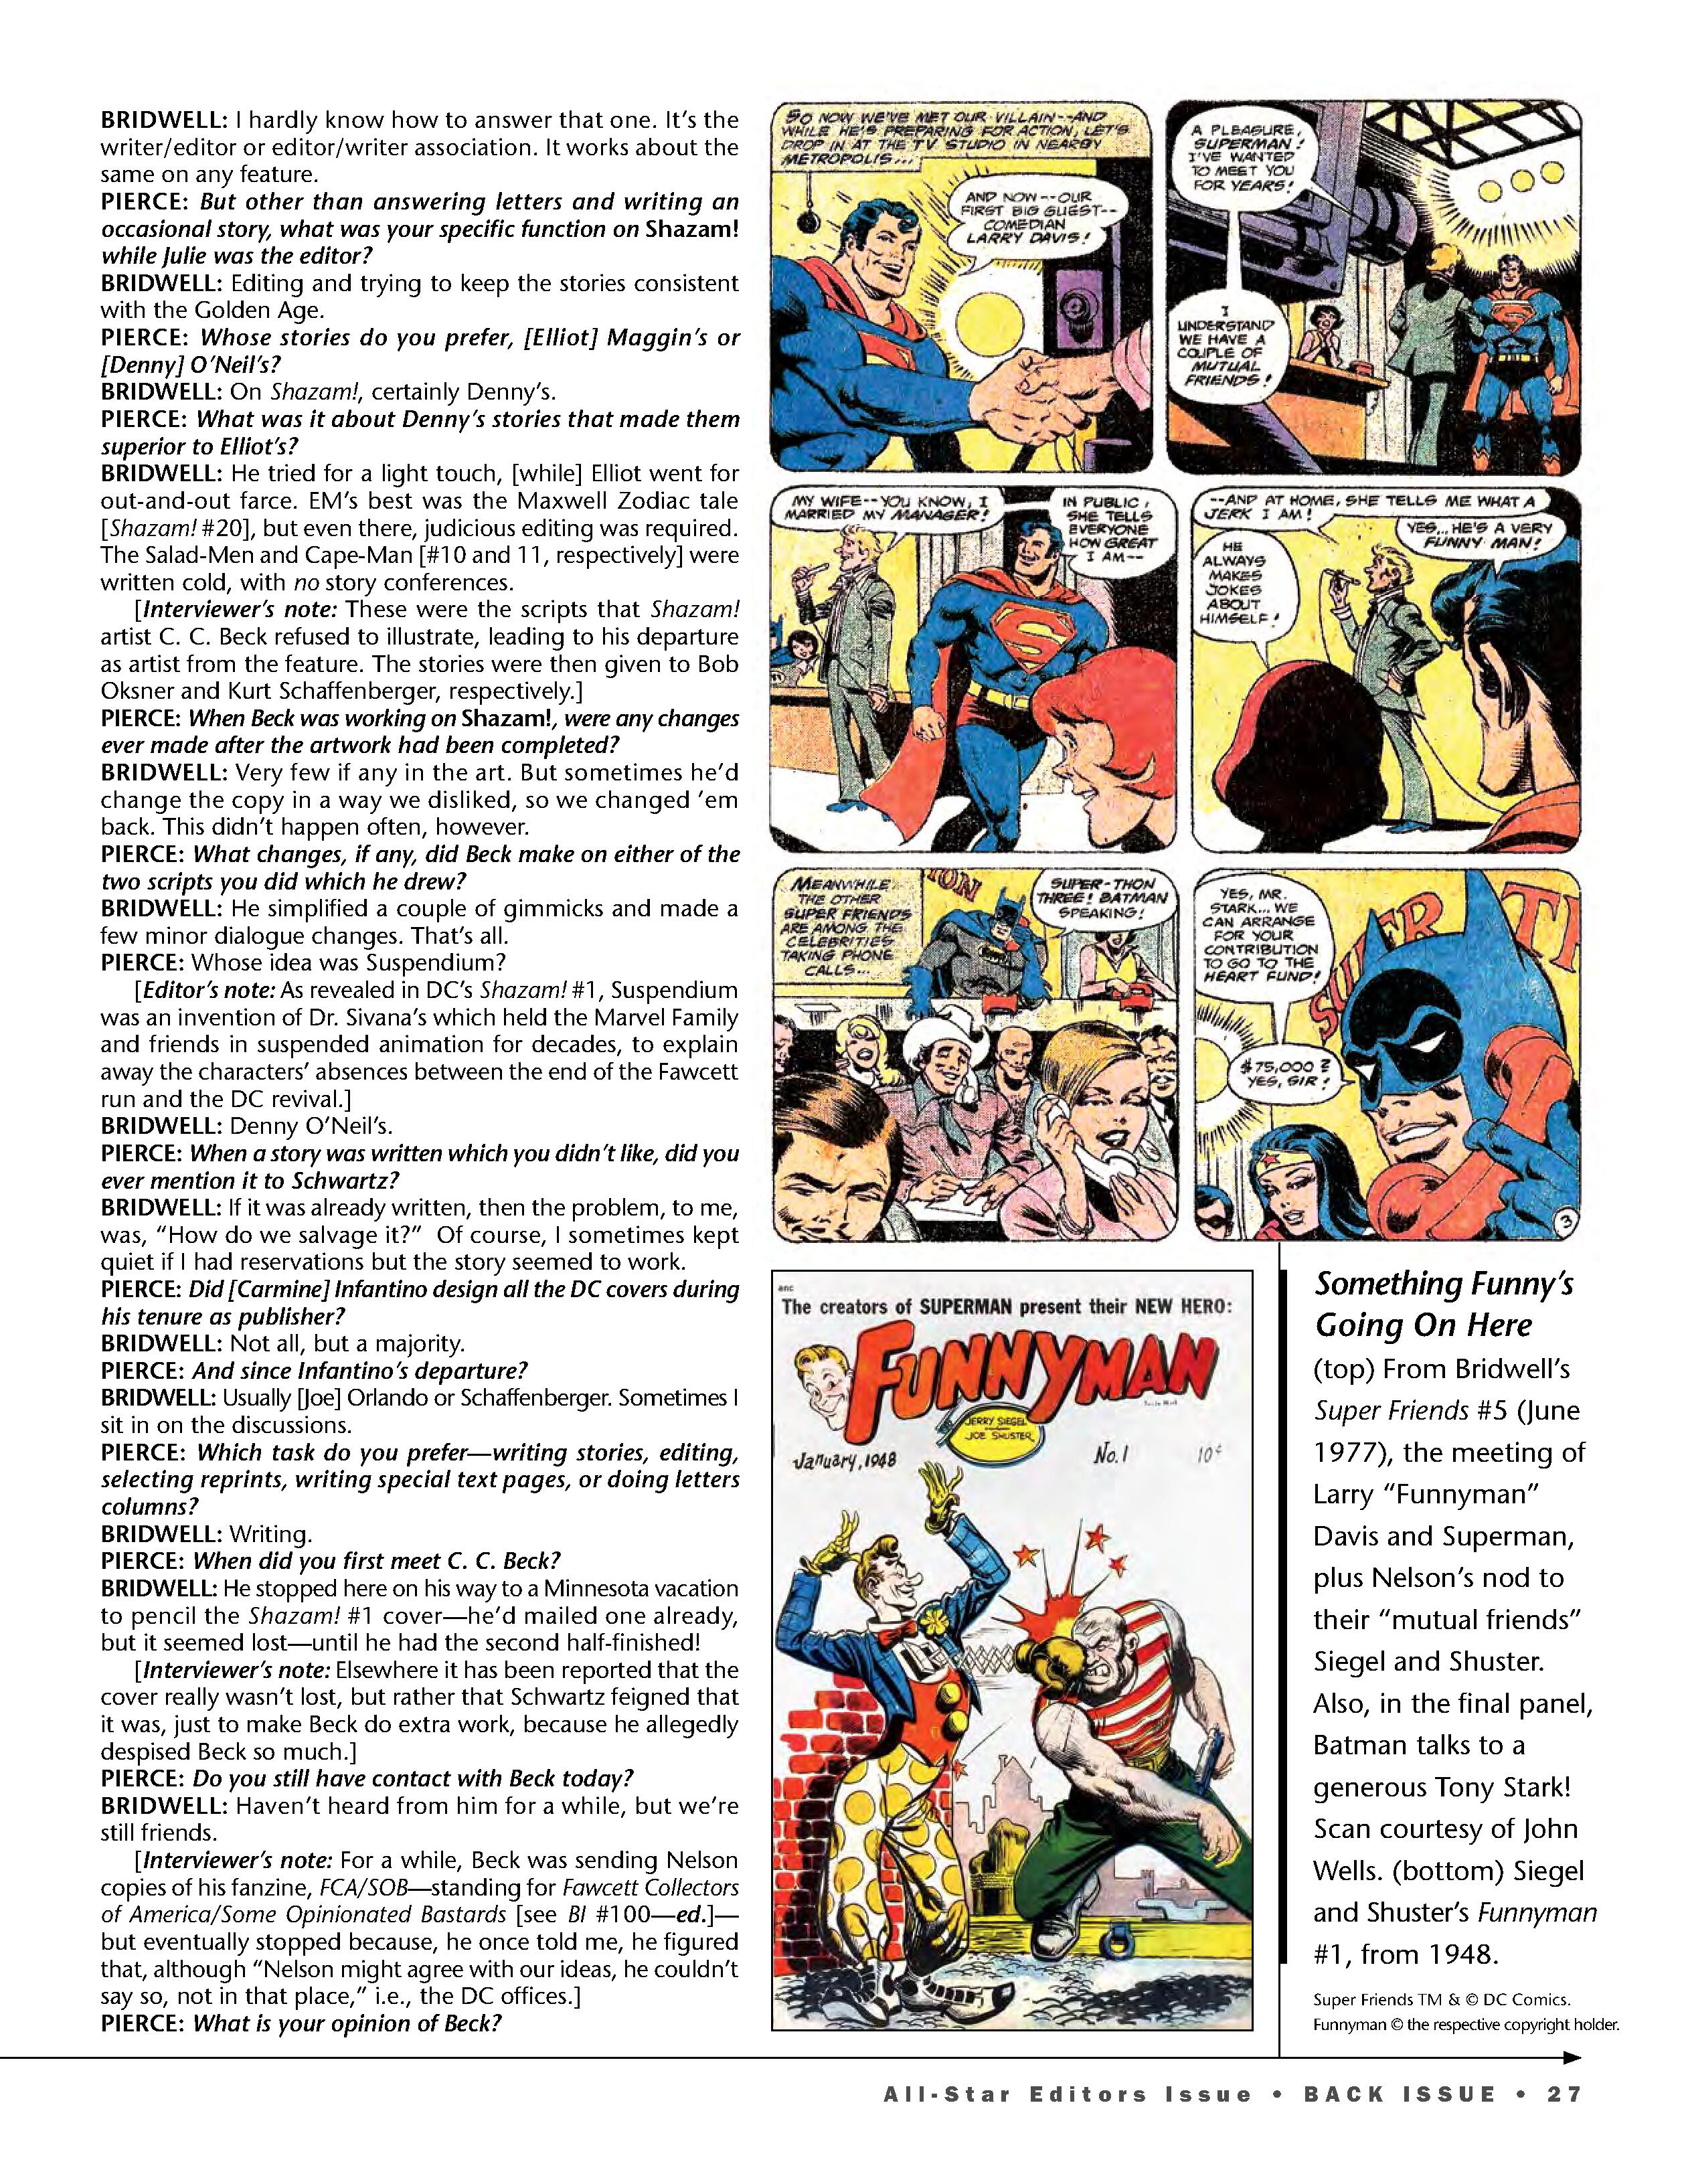 Read online Back Issue comic -  Issue #103 - 29